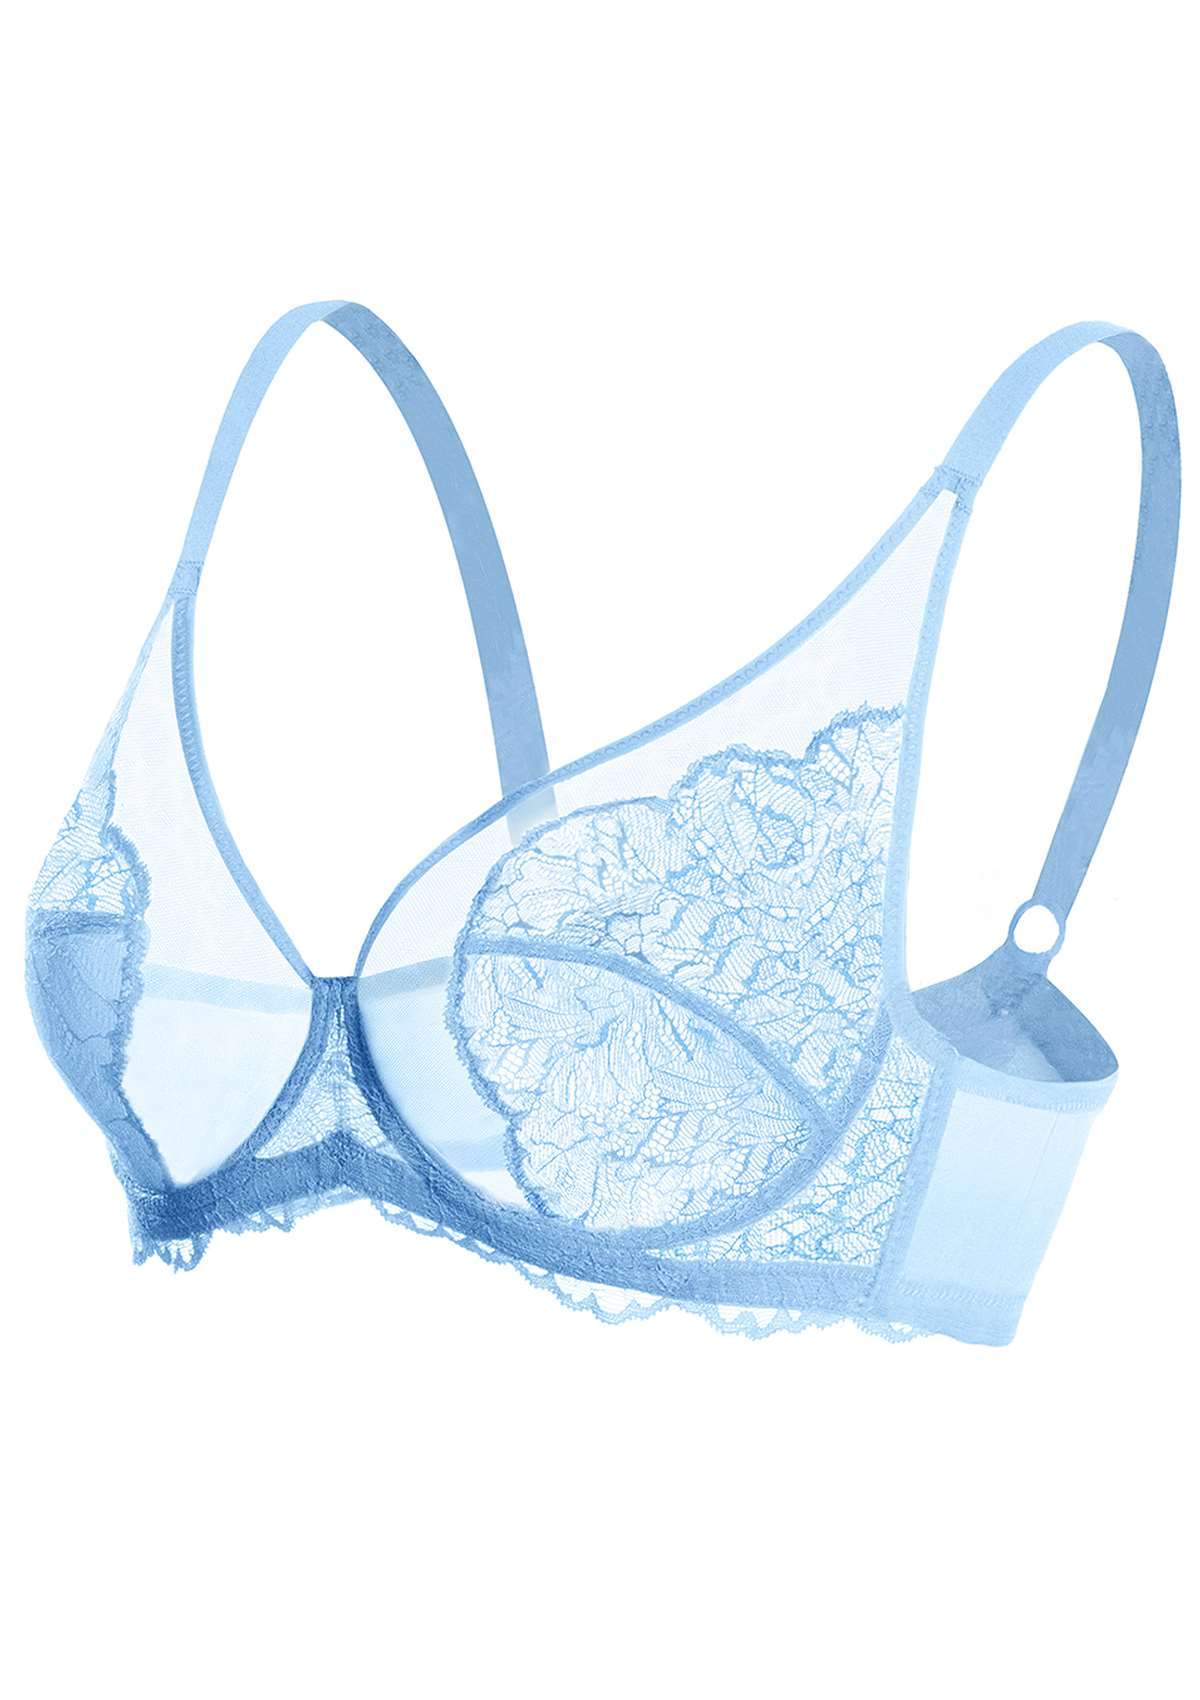 HSIA Blossom Full Coverage Supportive Unlined Underwire Bra Set - Storm Blue / 42 / D